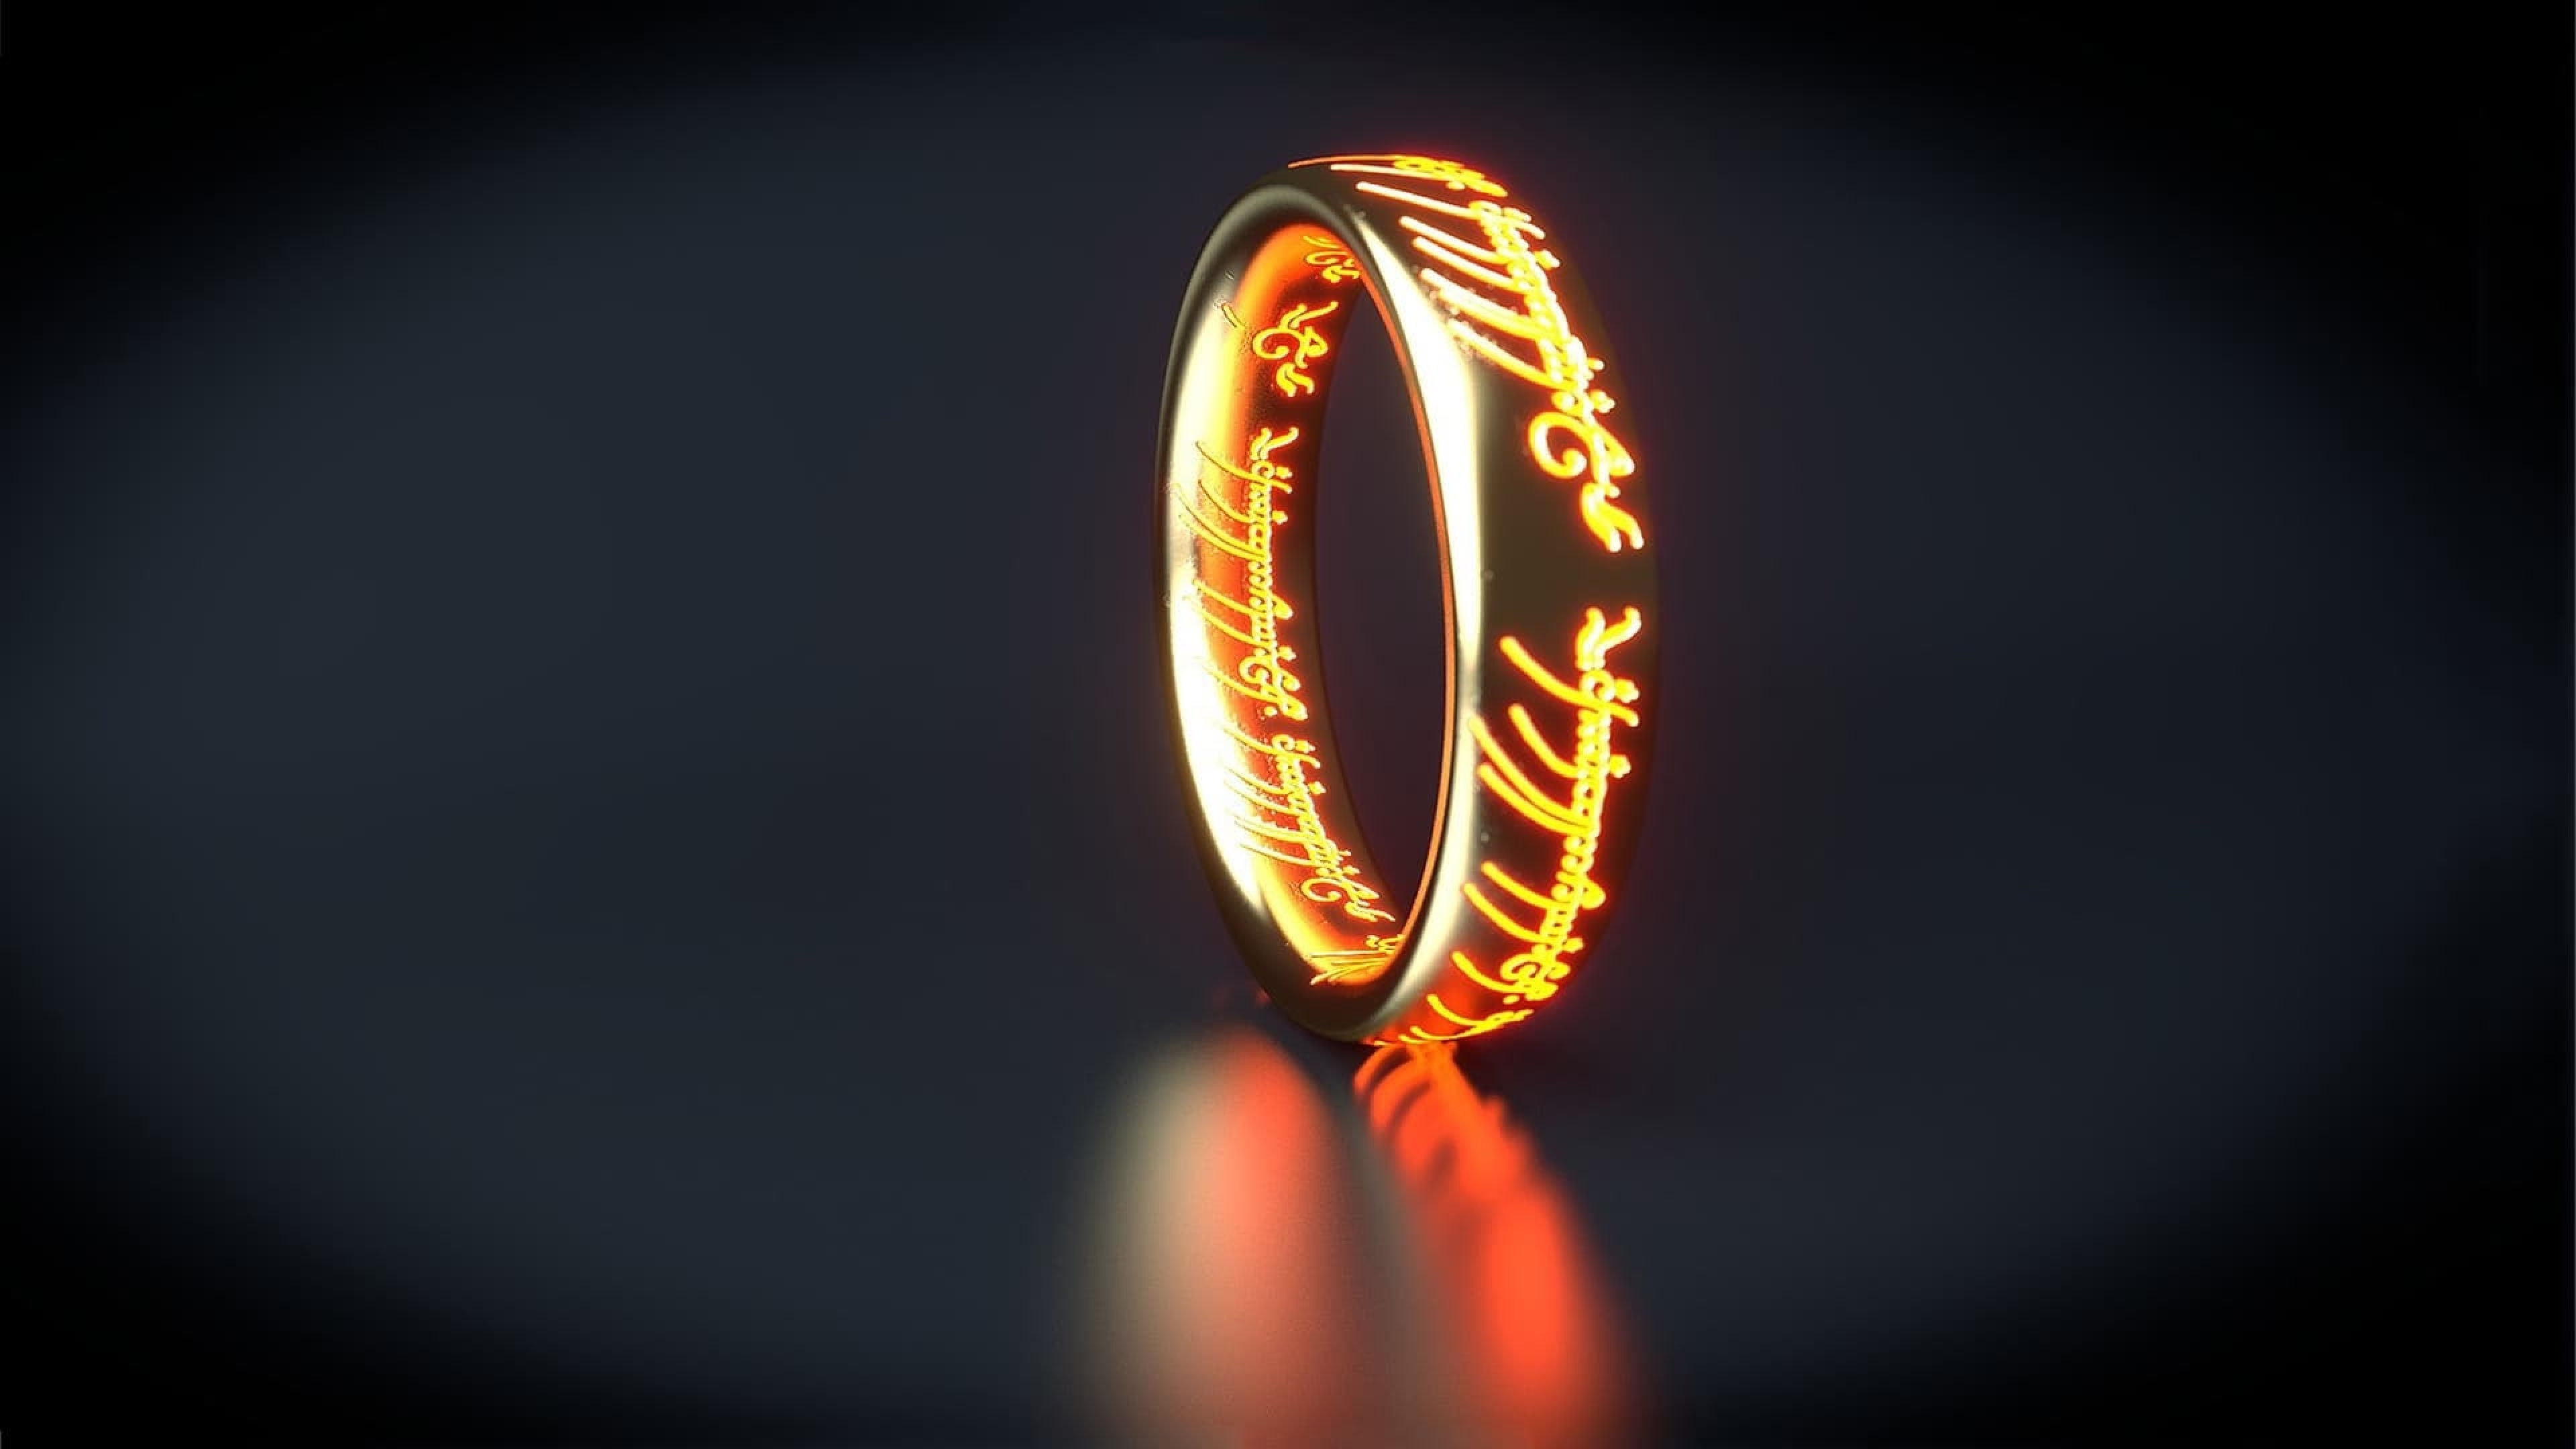 Ring, Lord of the Rings, Fantasy realm, Epic adventure, 3840x2160 4K Desktop